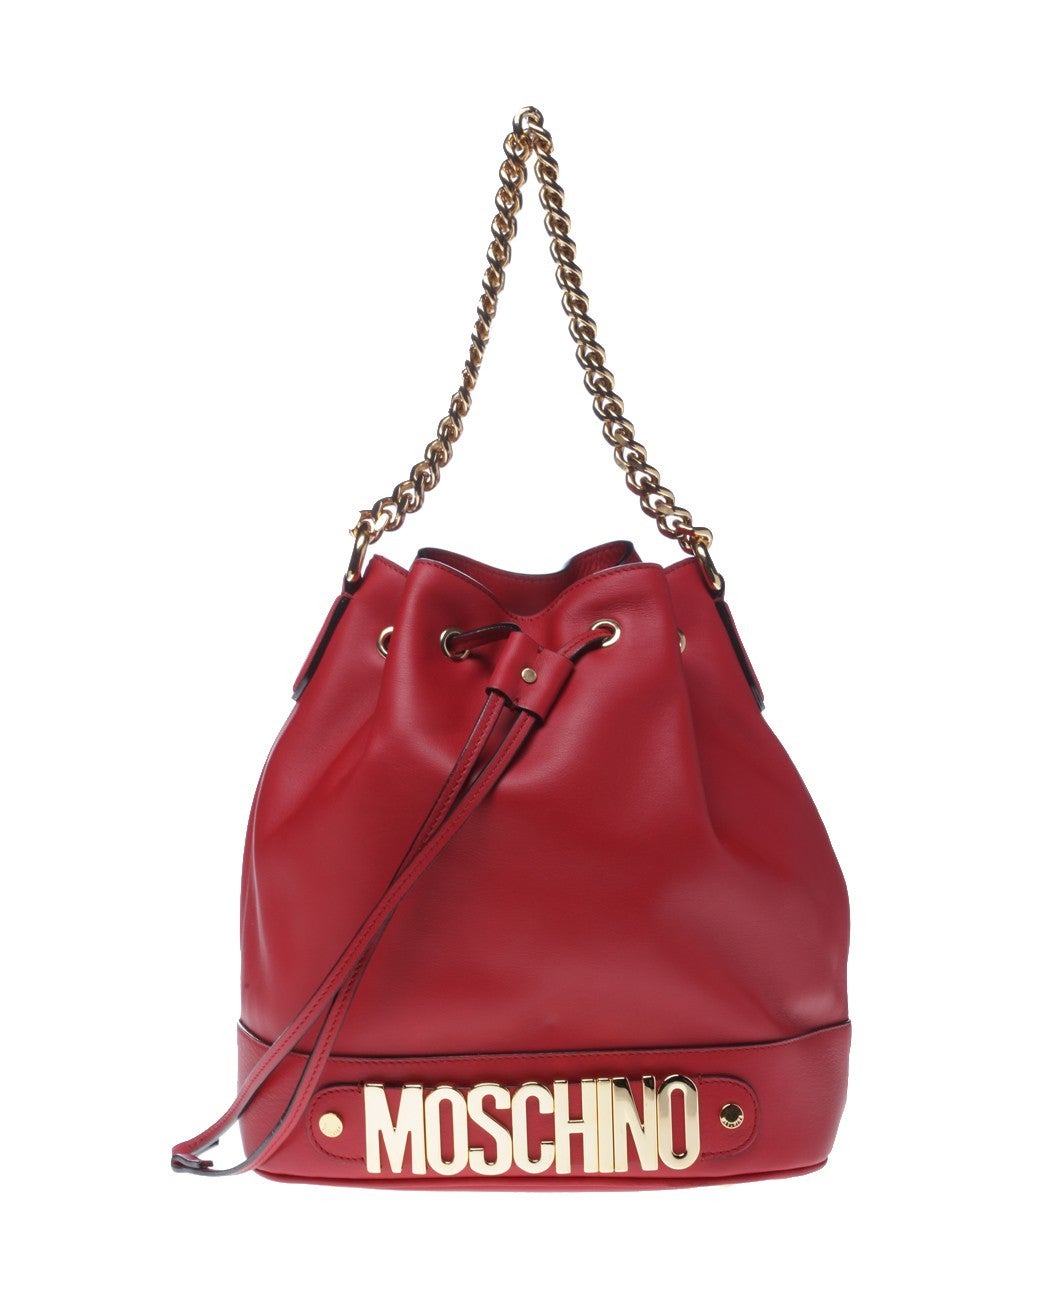 Celebrating its 30th anniversary, Moschino for its spring summer 2014 collection, did not disappoint in the fun and quirky accessories department. The brand’s bucket bag, dramatized by its bold gold logo took centre stage during the show. It’s